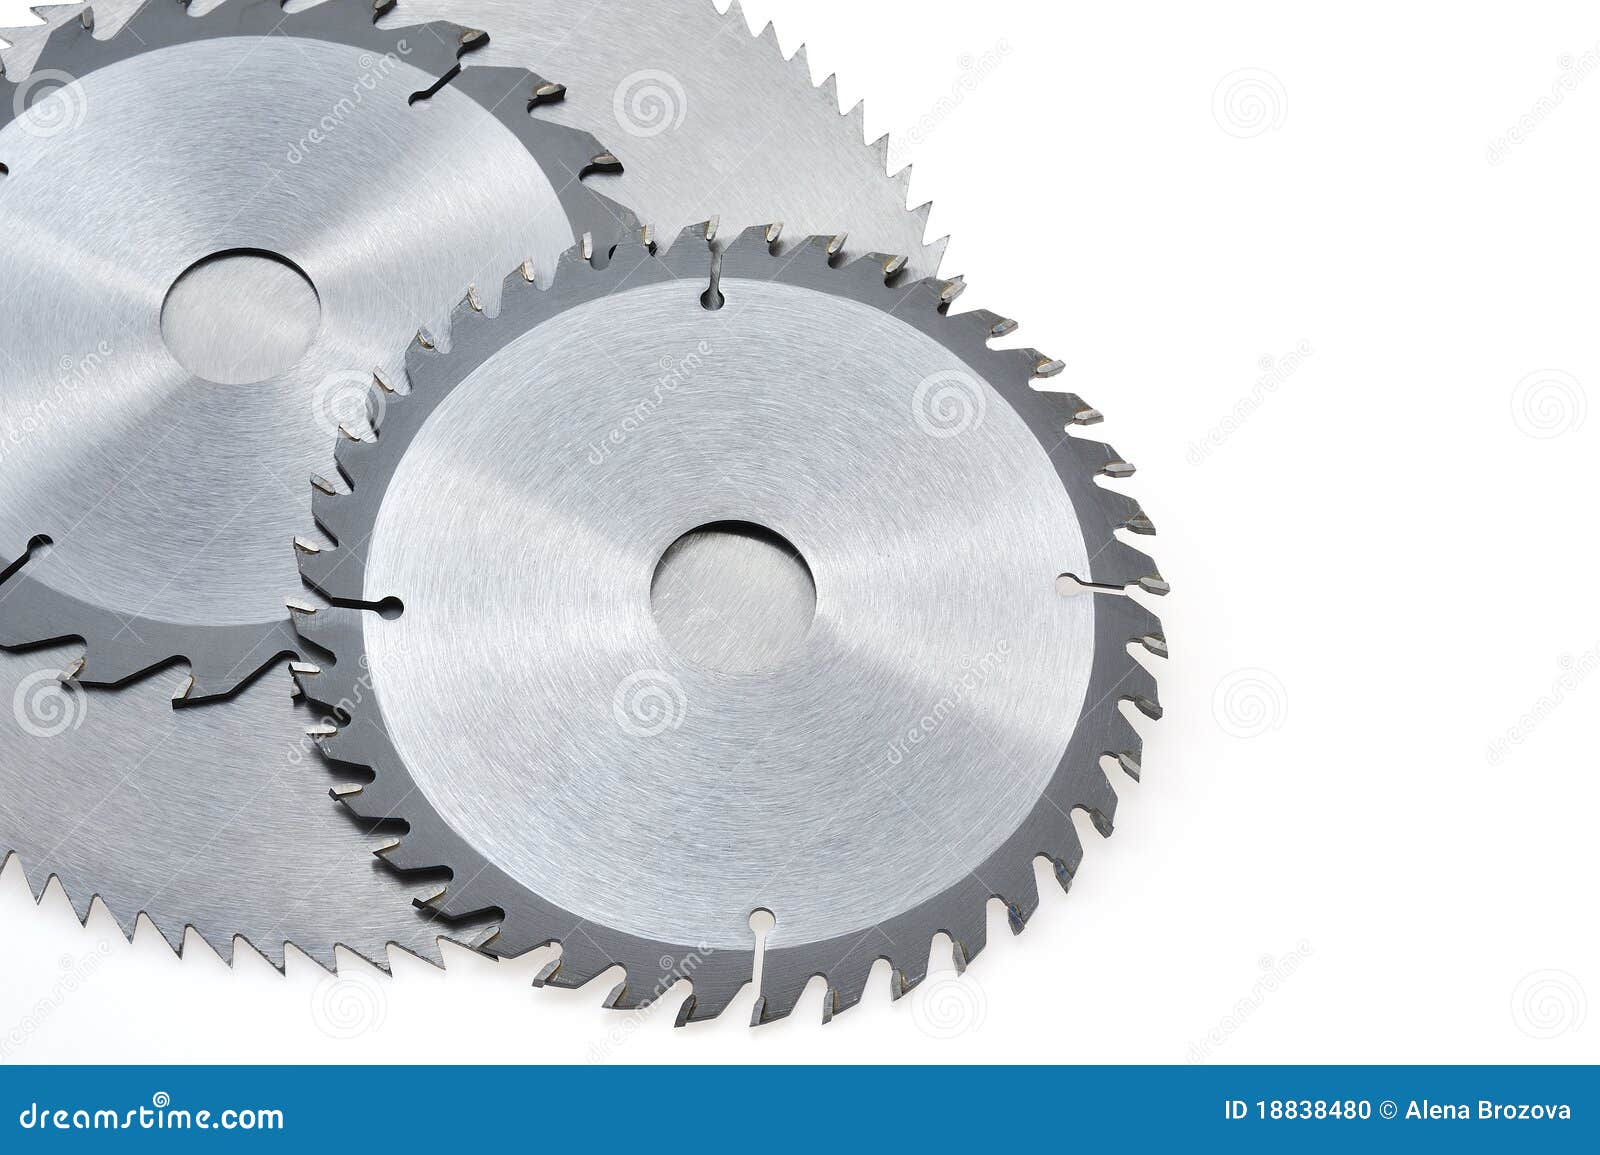 circular saw blades for wood  on white